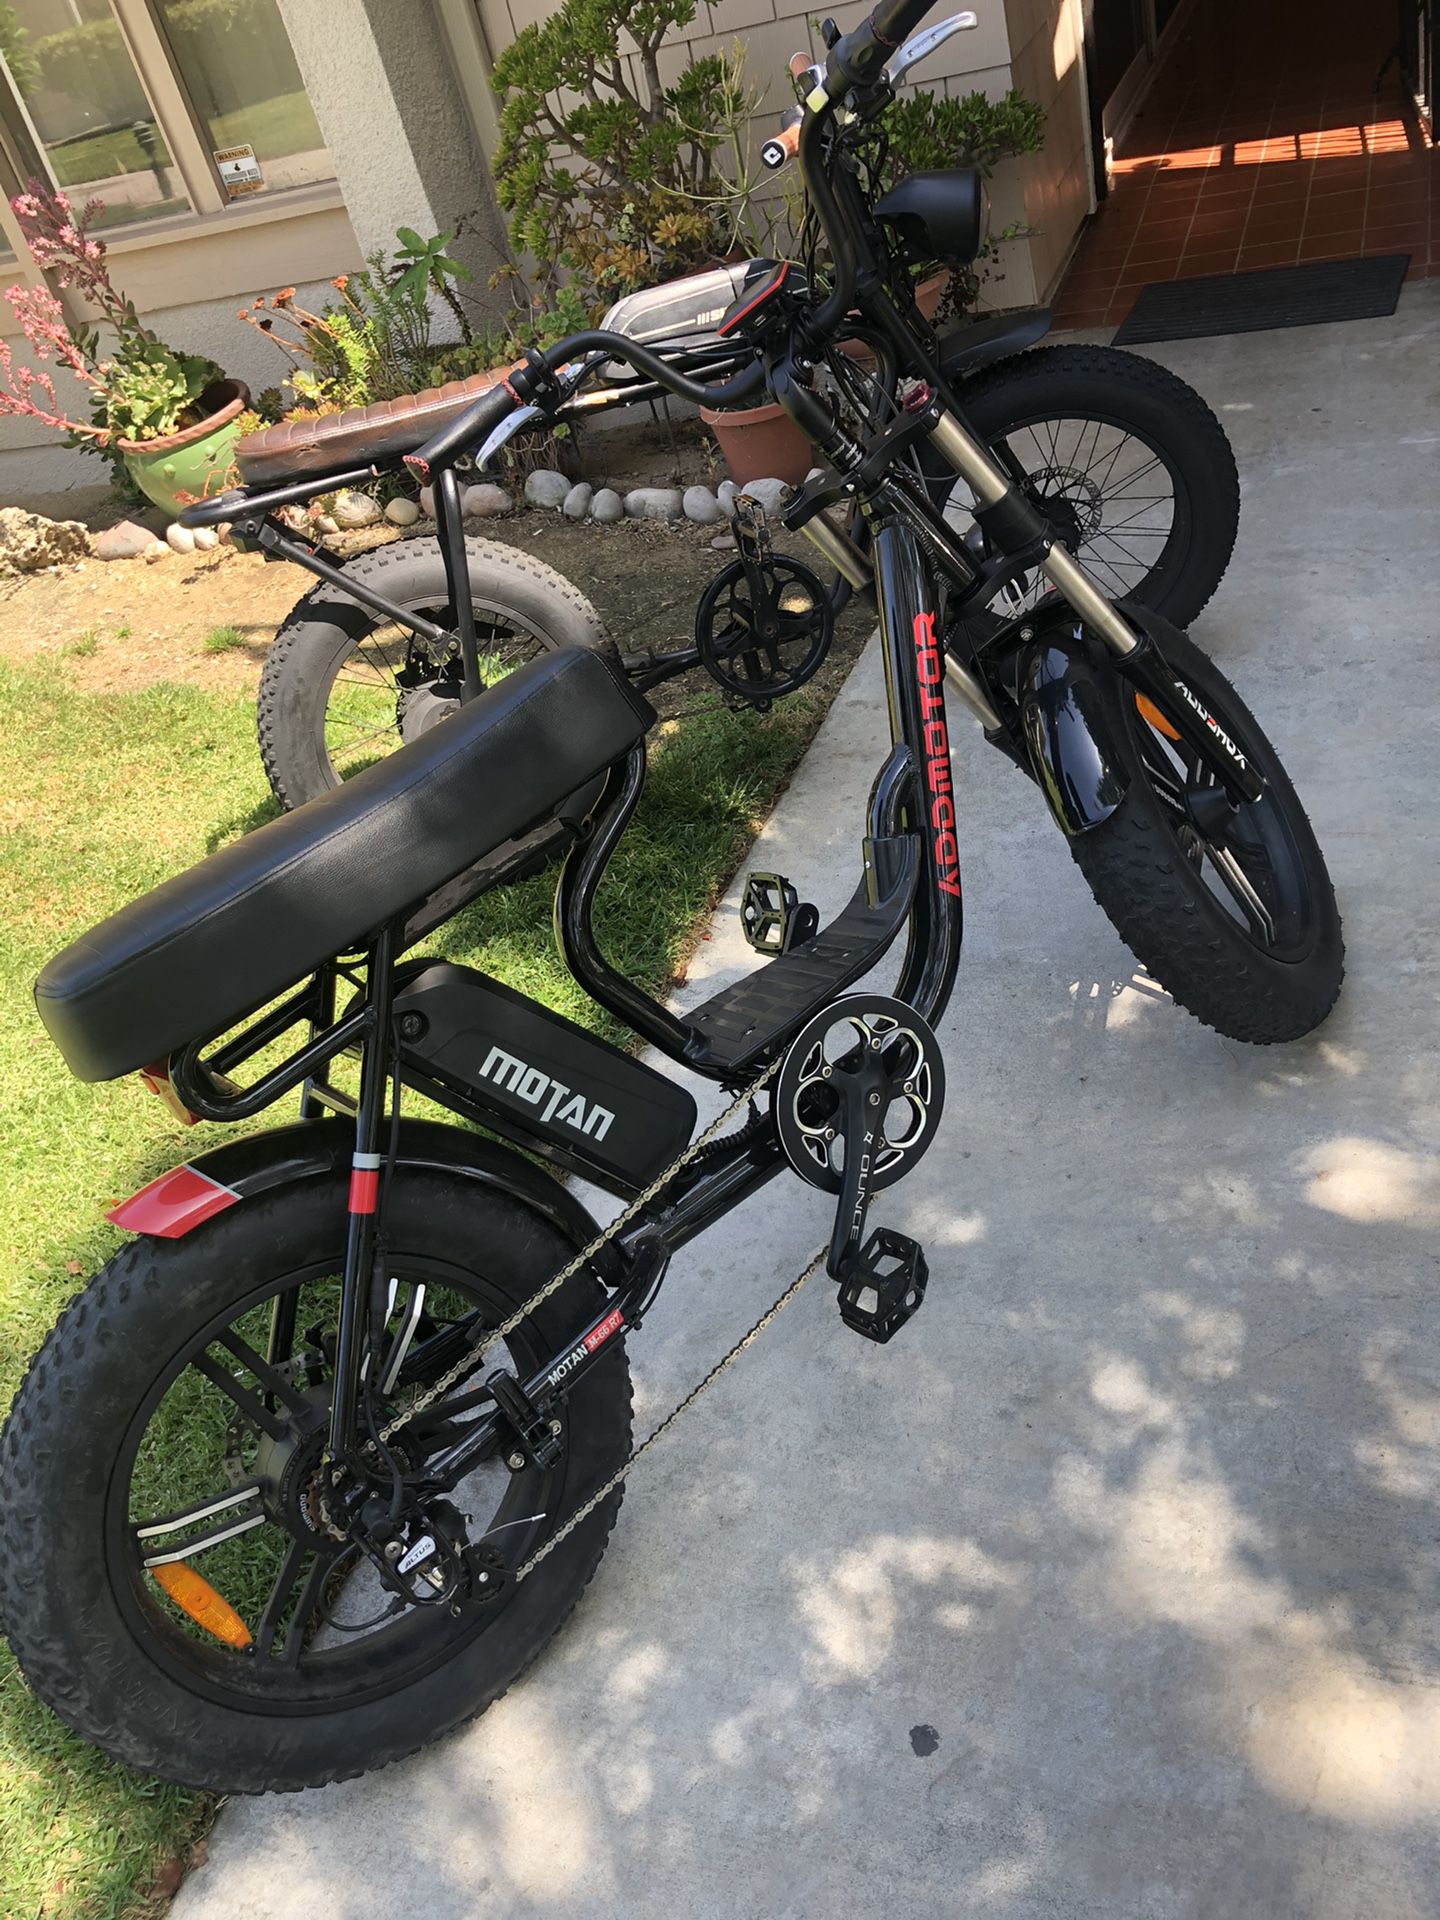 Electric Bike Addmotor Moped Scooter Ebike Motorcycle Must See